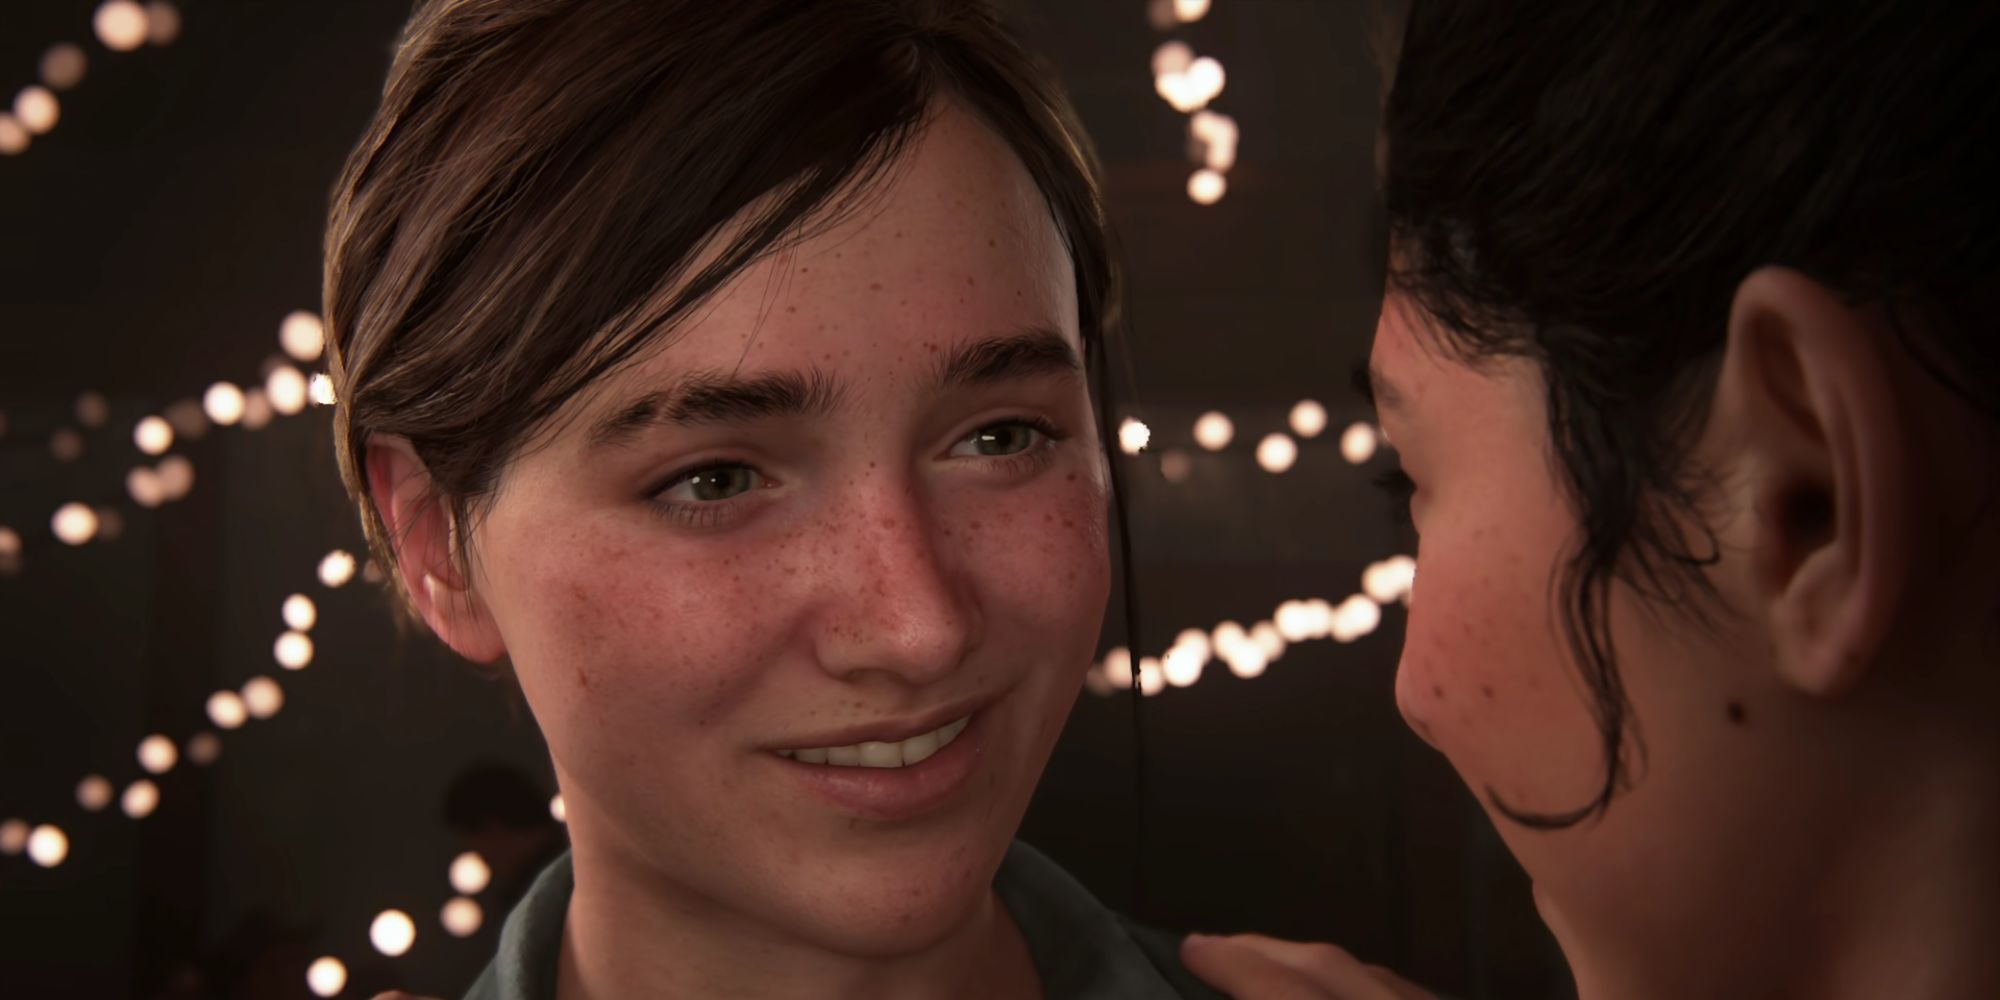 The Last Of Us Part 2 Remastered Preorders Available Ahead Of